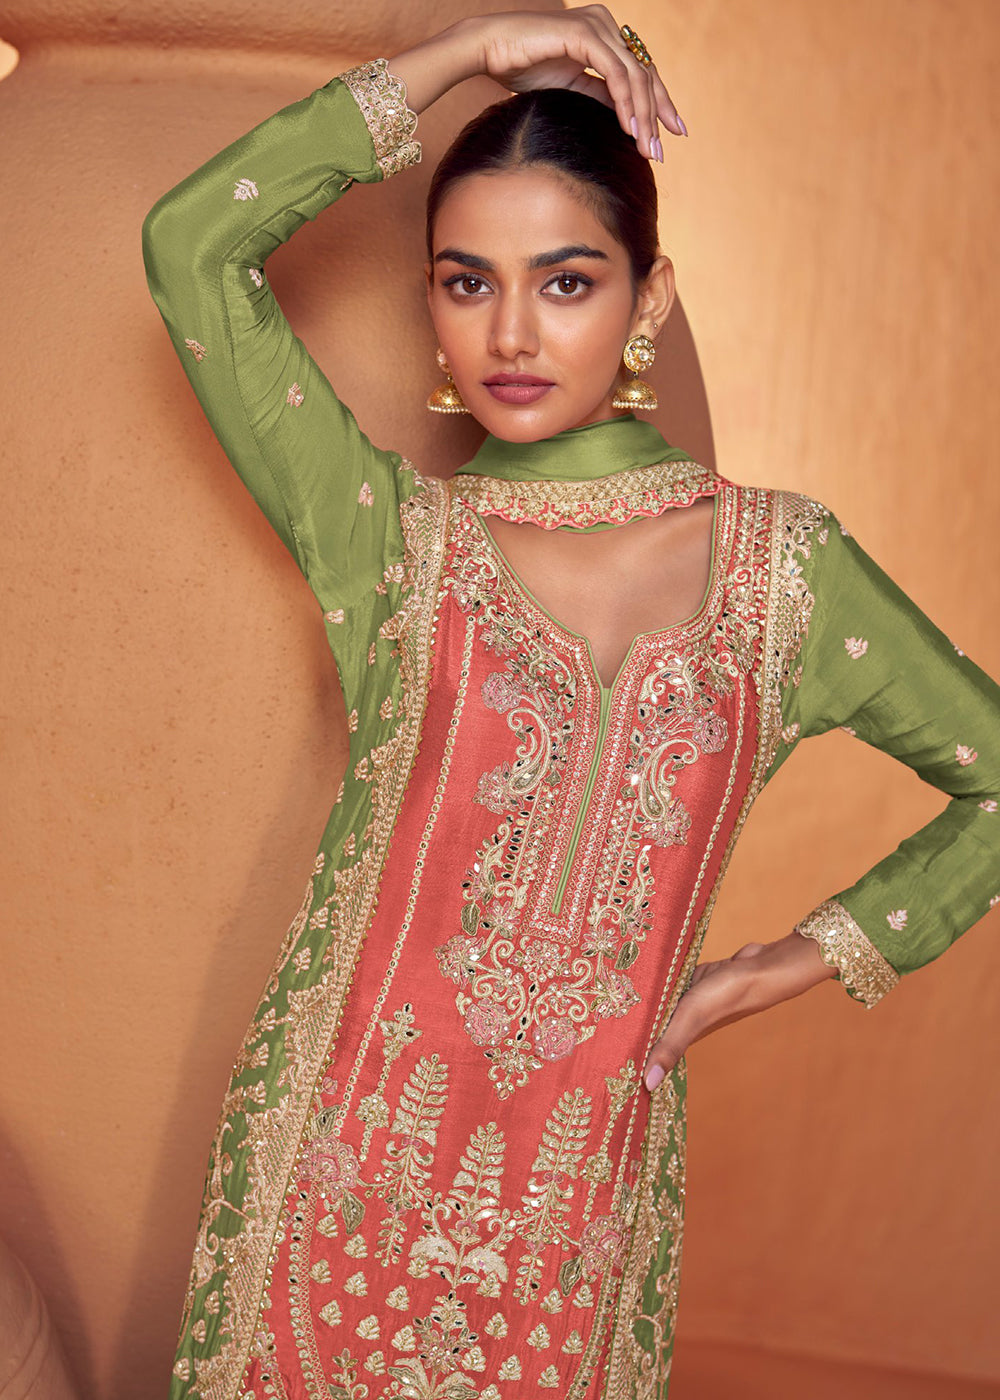 Shop Now Peach & Green Embroidered Wedding Sharara Suit Online at Empress Clothing in USA, UK, Canada, Italy & Worldwide. 